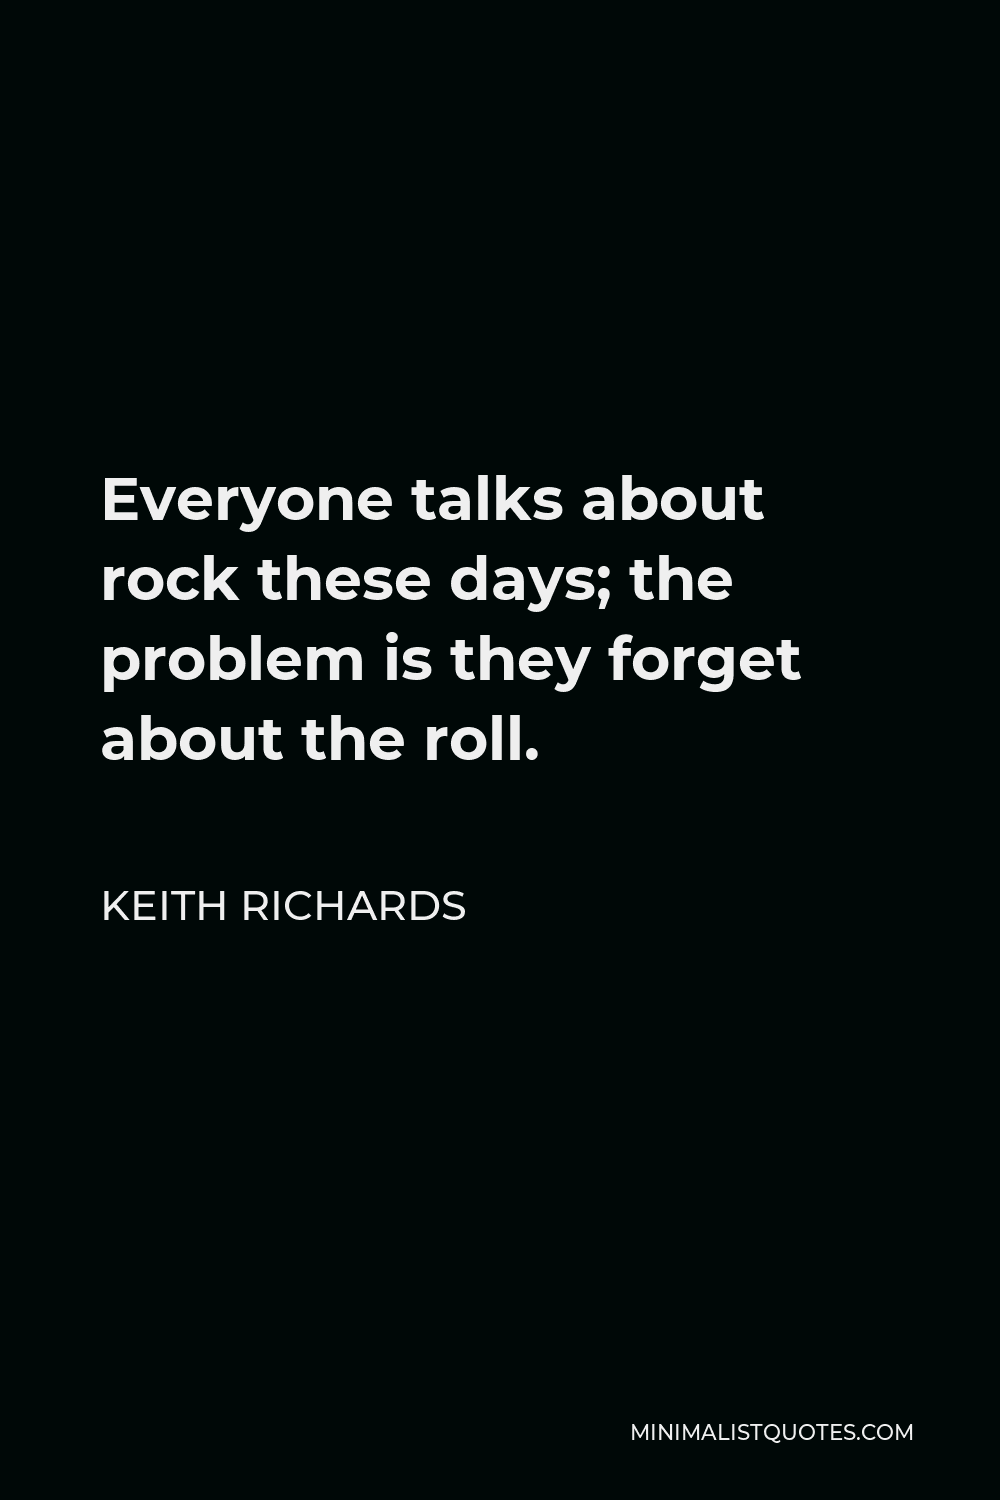 Keith Richards Quote - Everyone talks about rock these days; the problem is they forget about the roll.